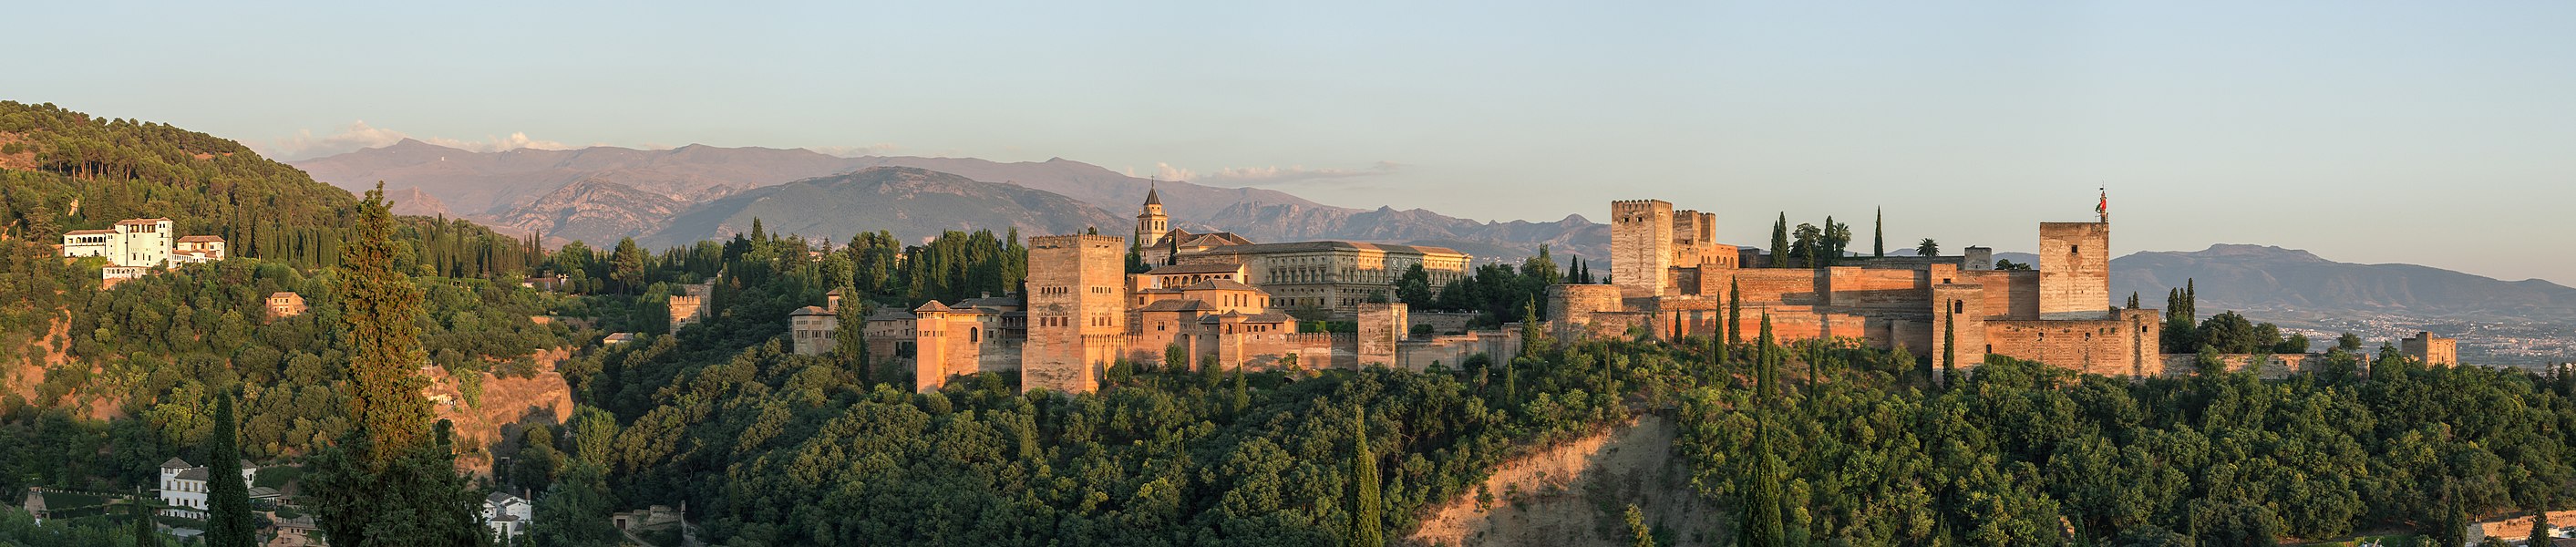 The Alhambra, a Moorish palace and fort in Spain.